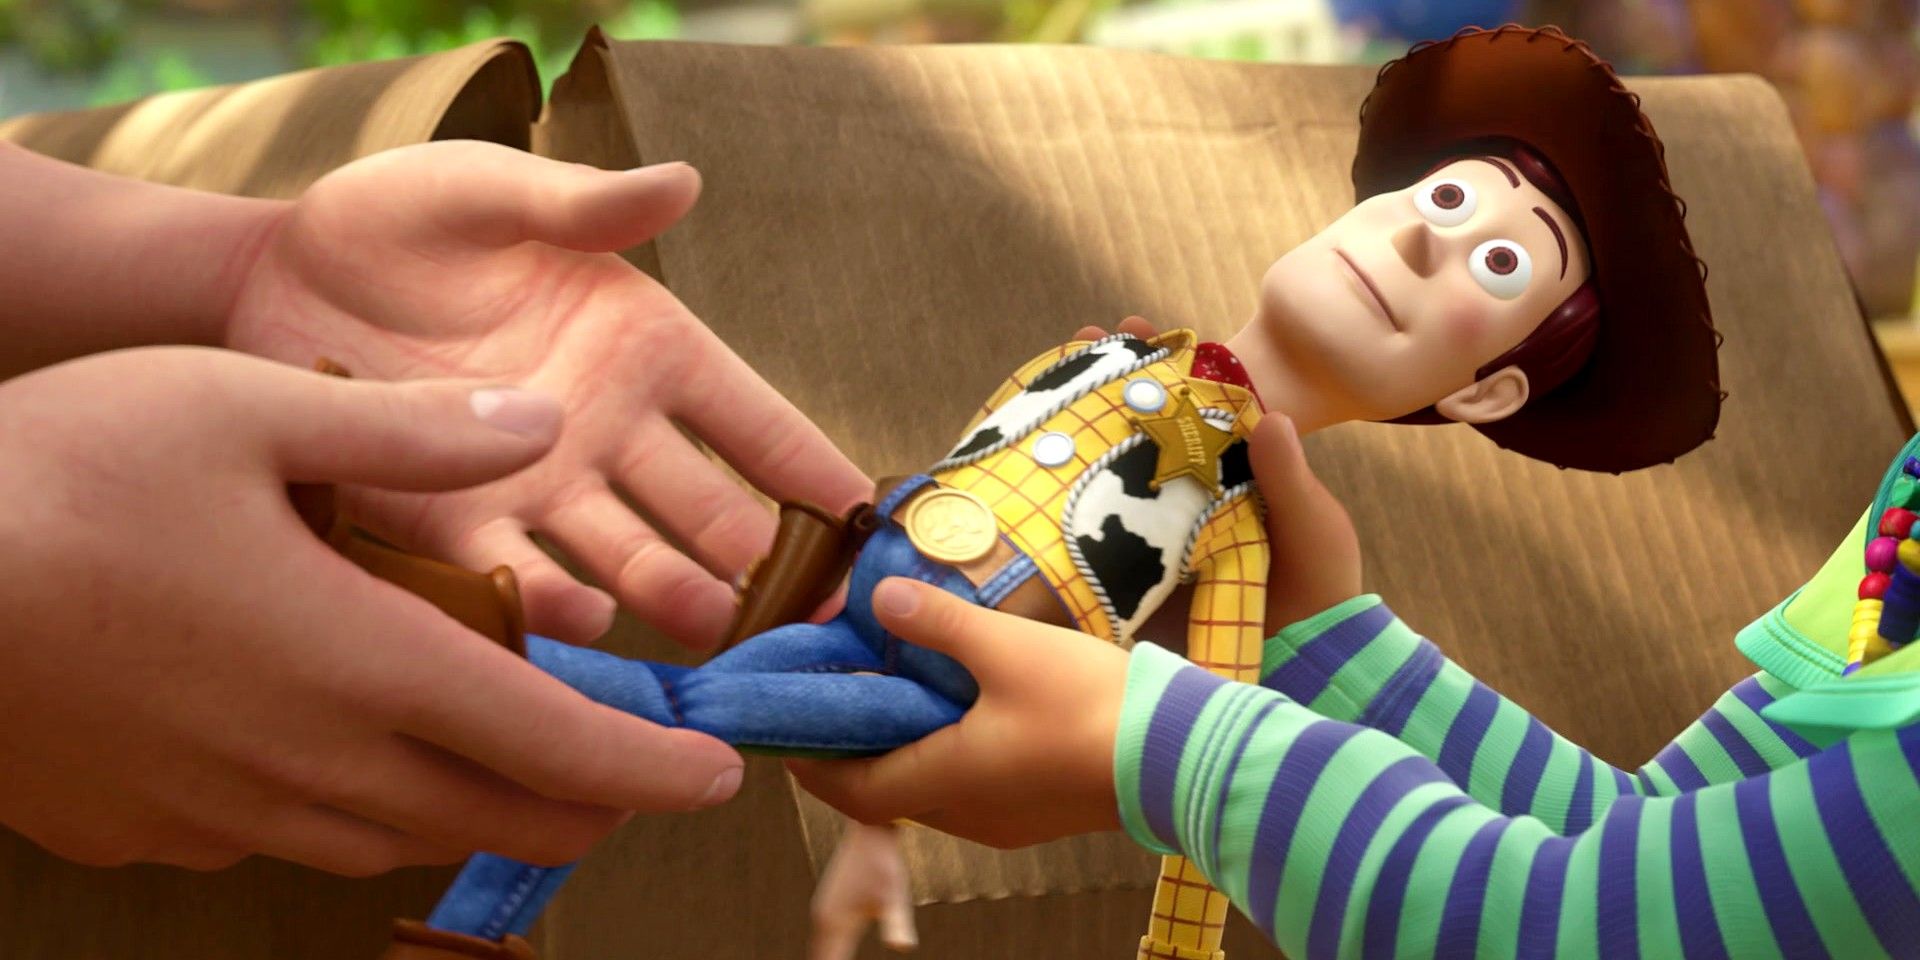 Andy hands Woody to Bonnie in Toy Story 3